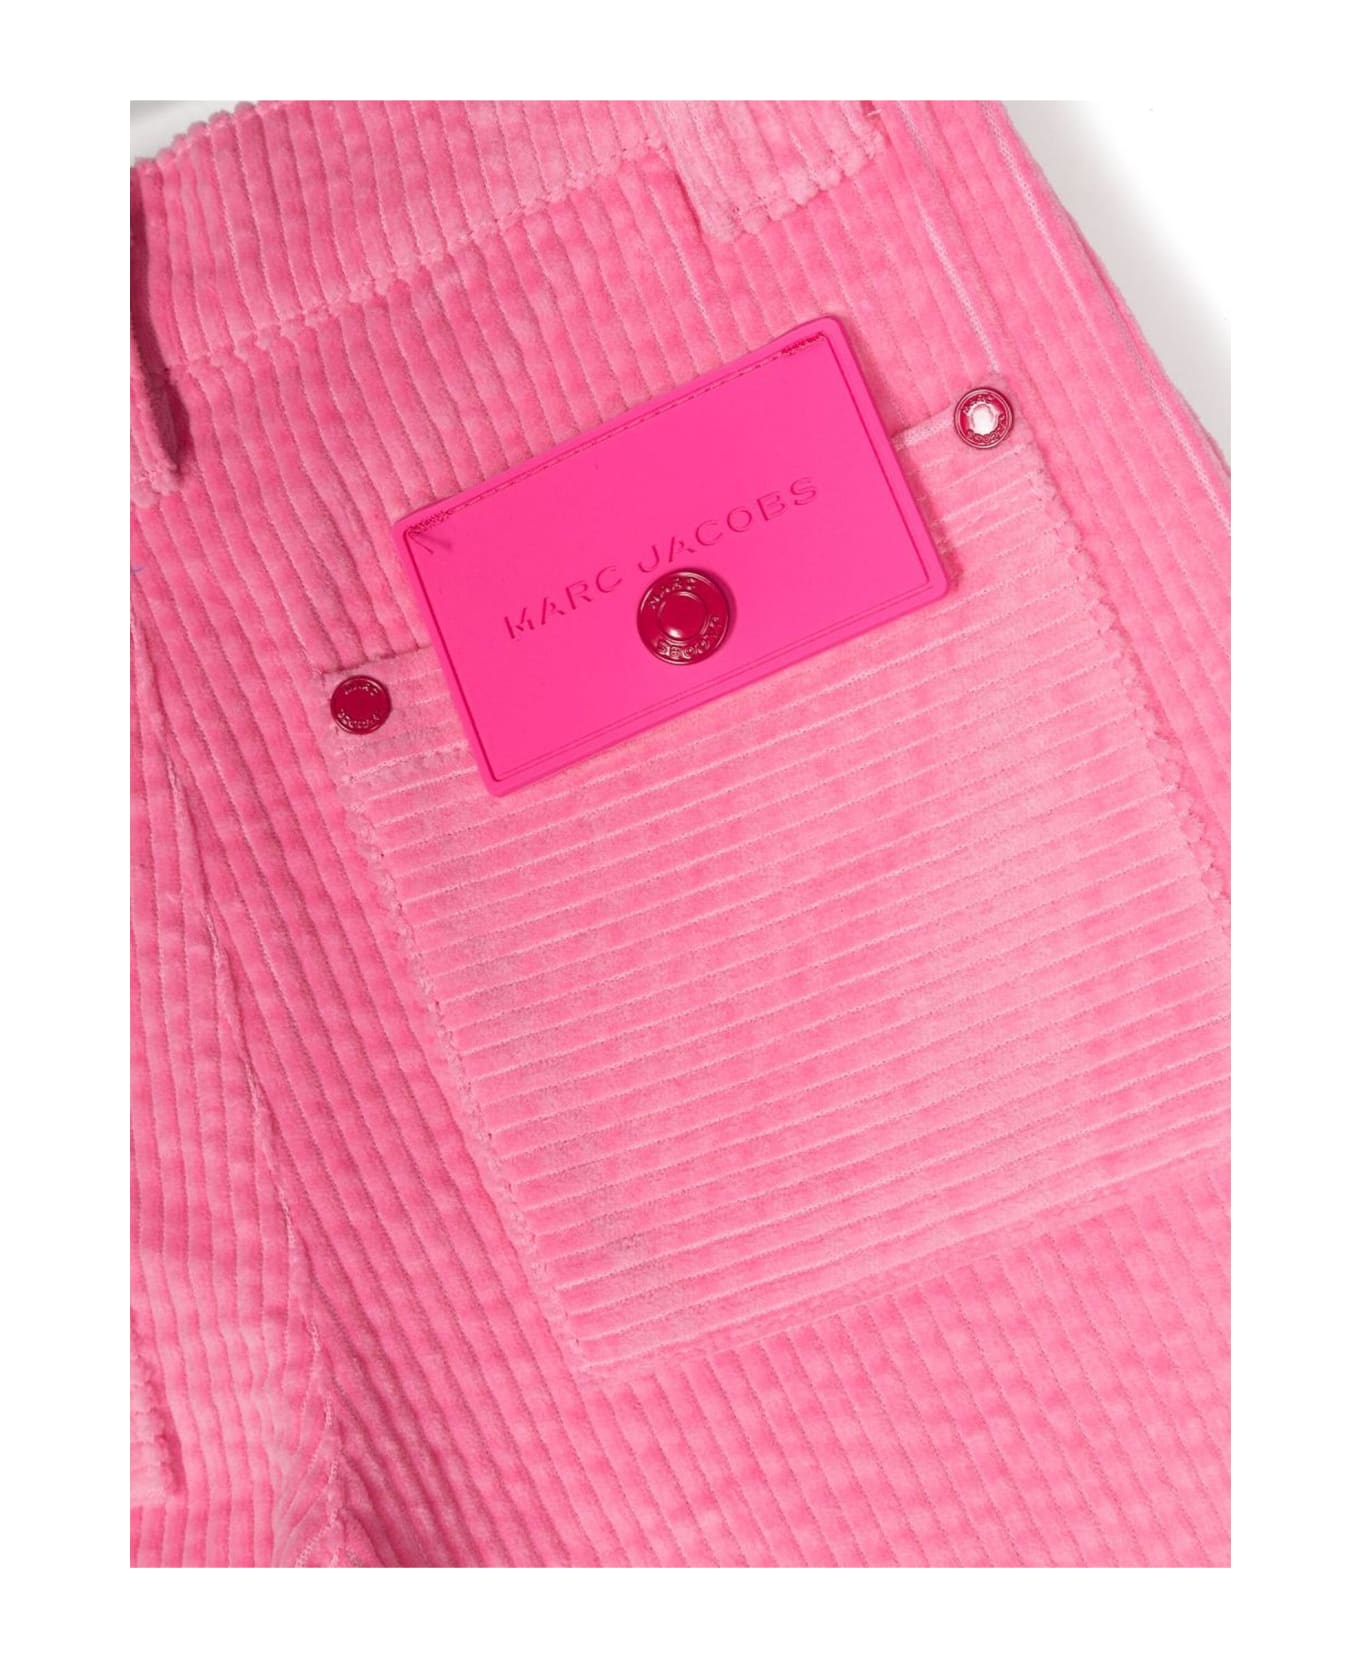 Little Marc Jacobs Pink Cotton Corduroy Trousers - G Albicocca ボトムス